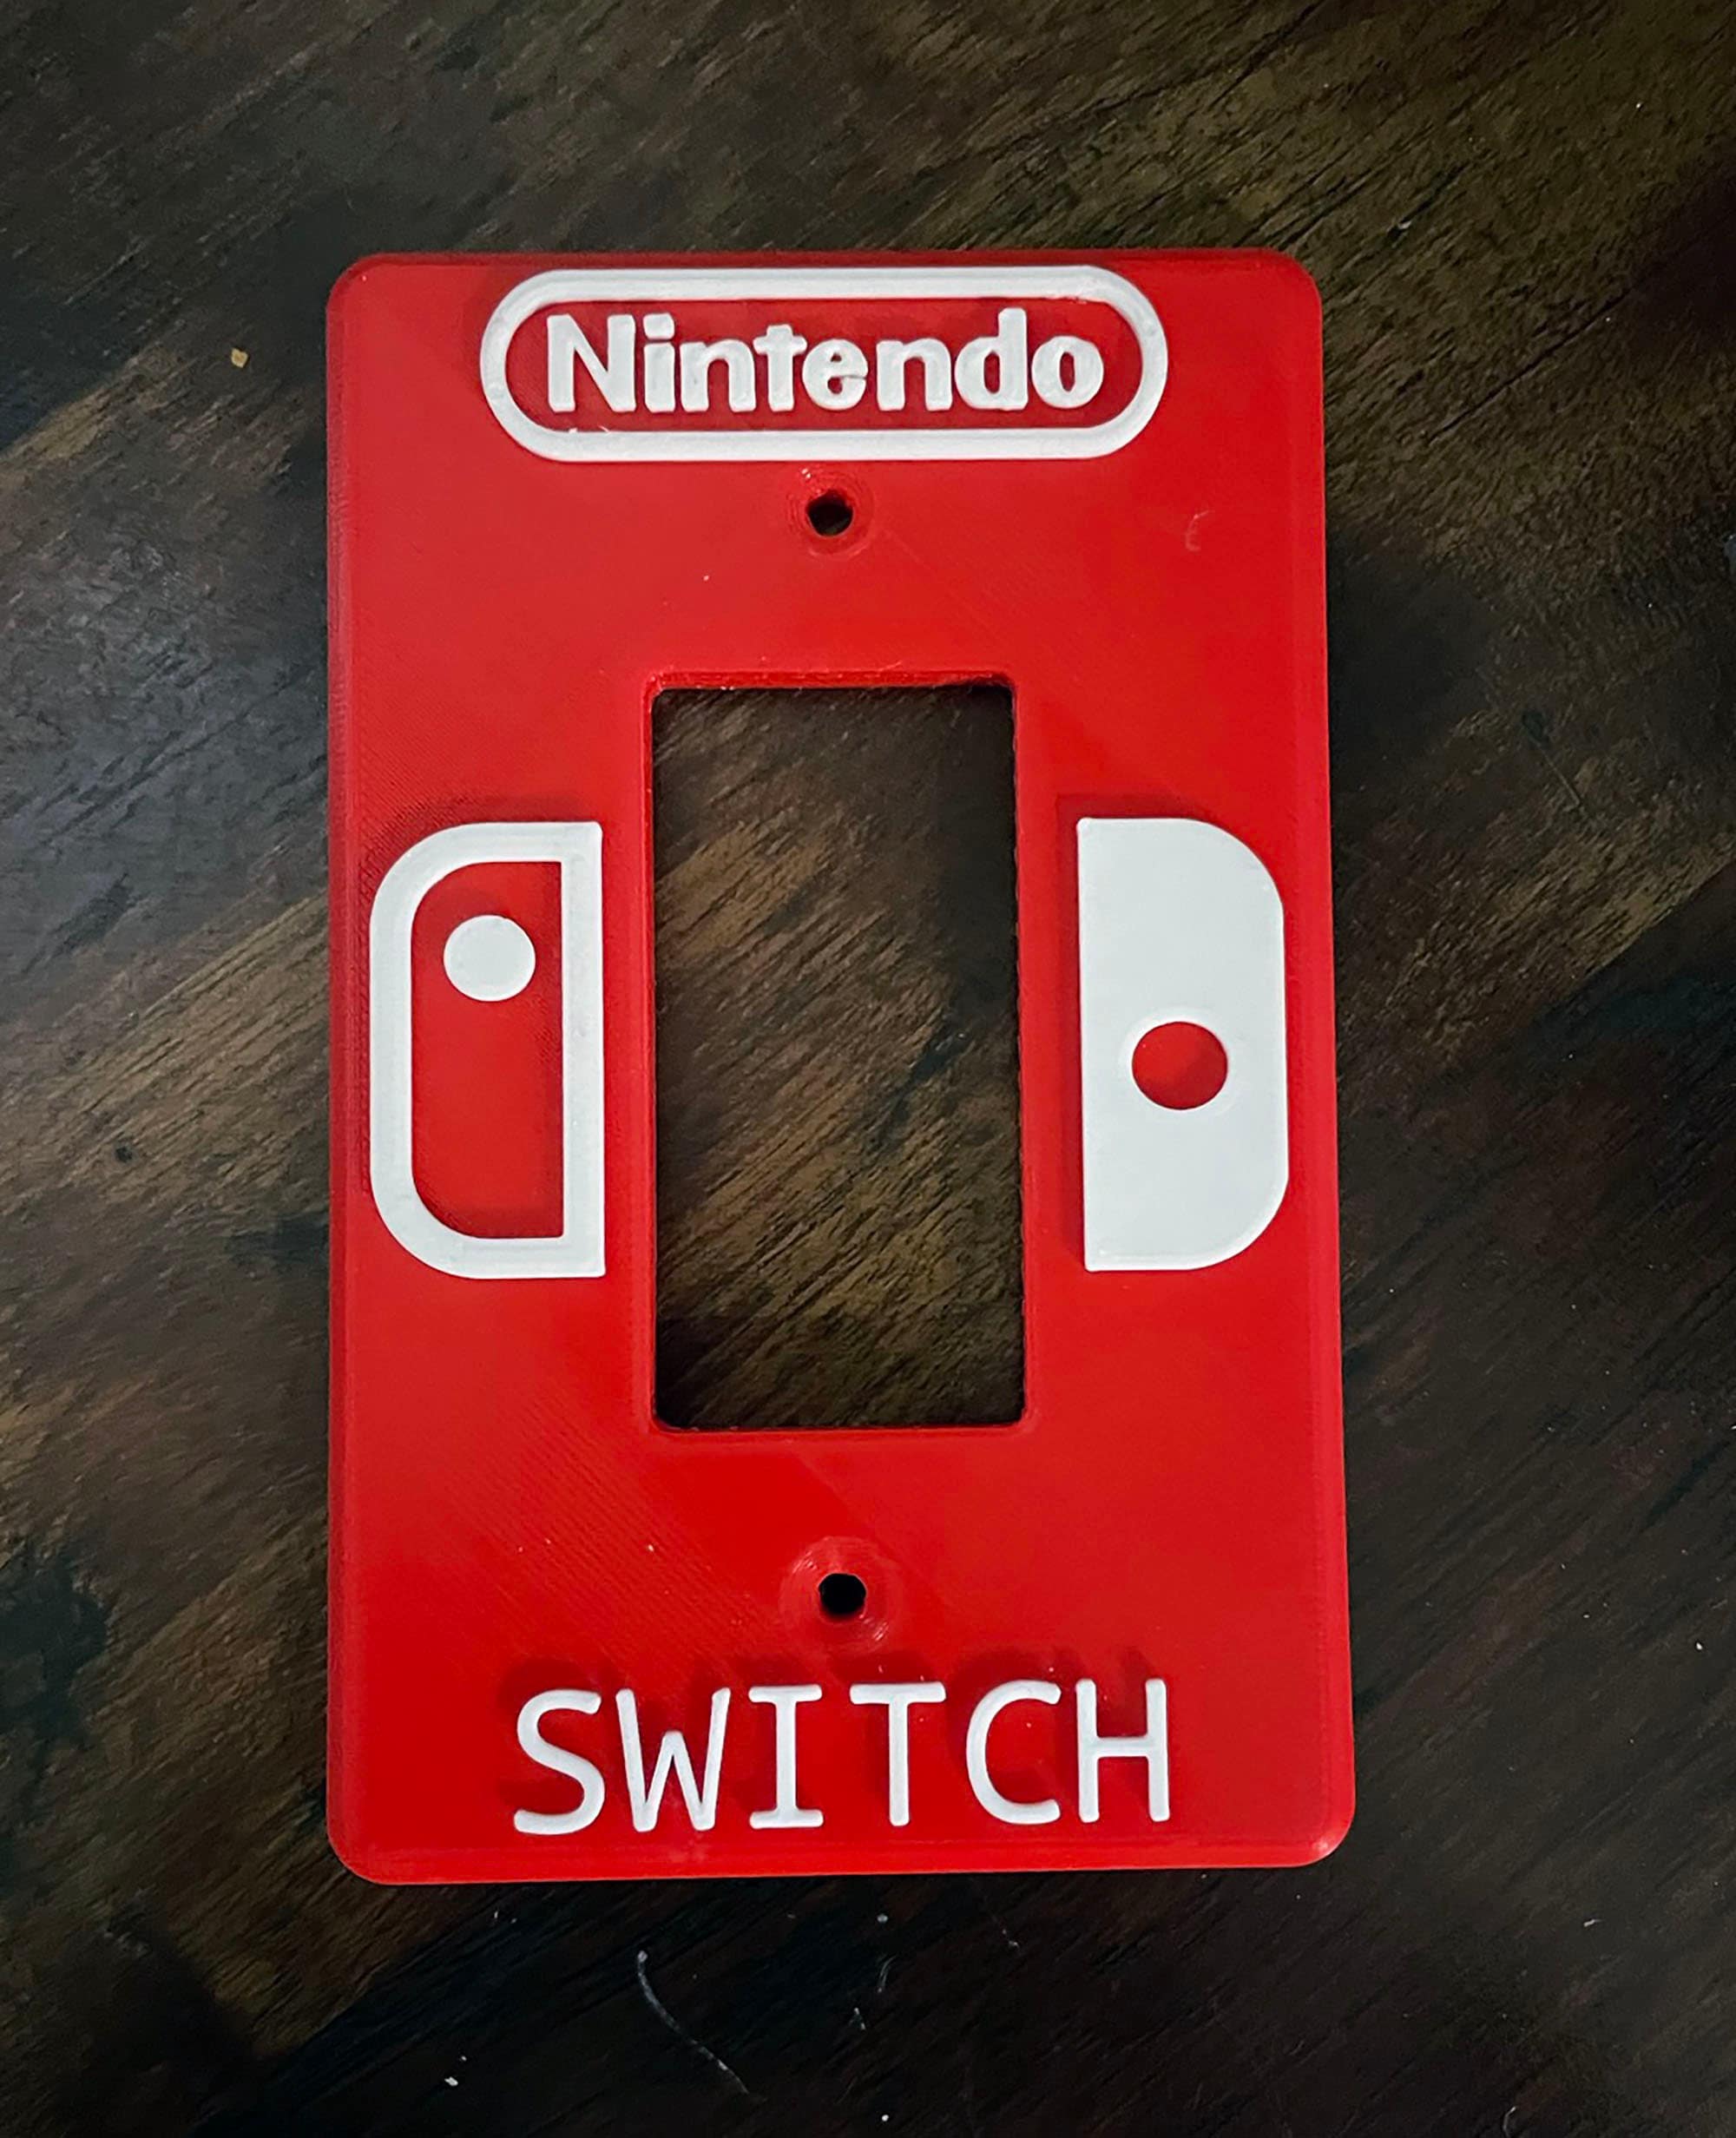 Nintendo NES Controller Light Switch Cover Plate Duplex Outlet